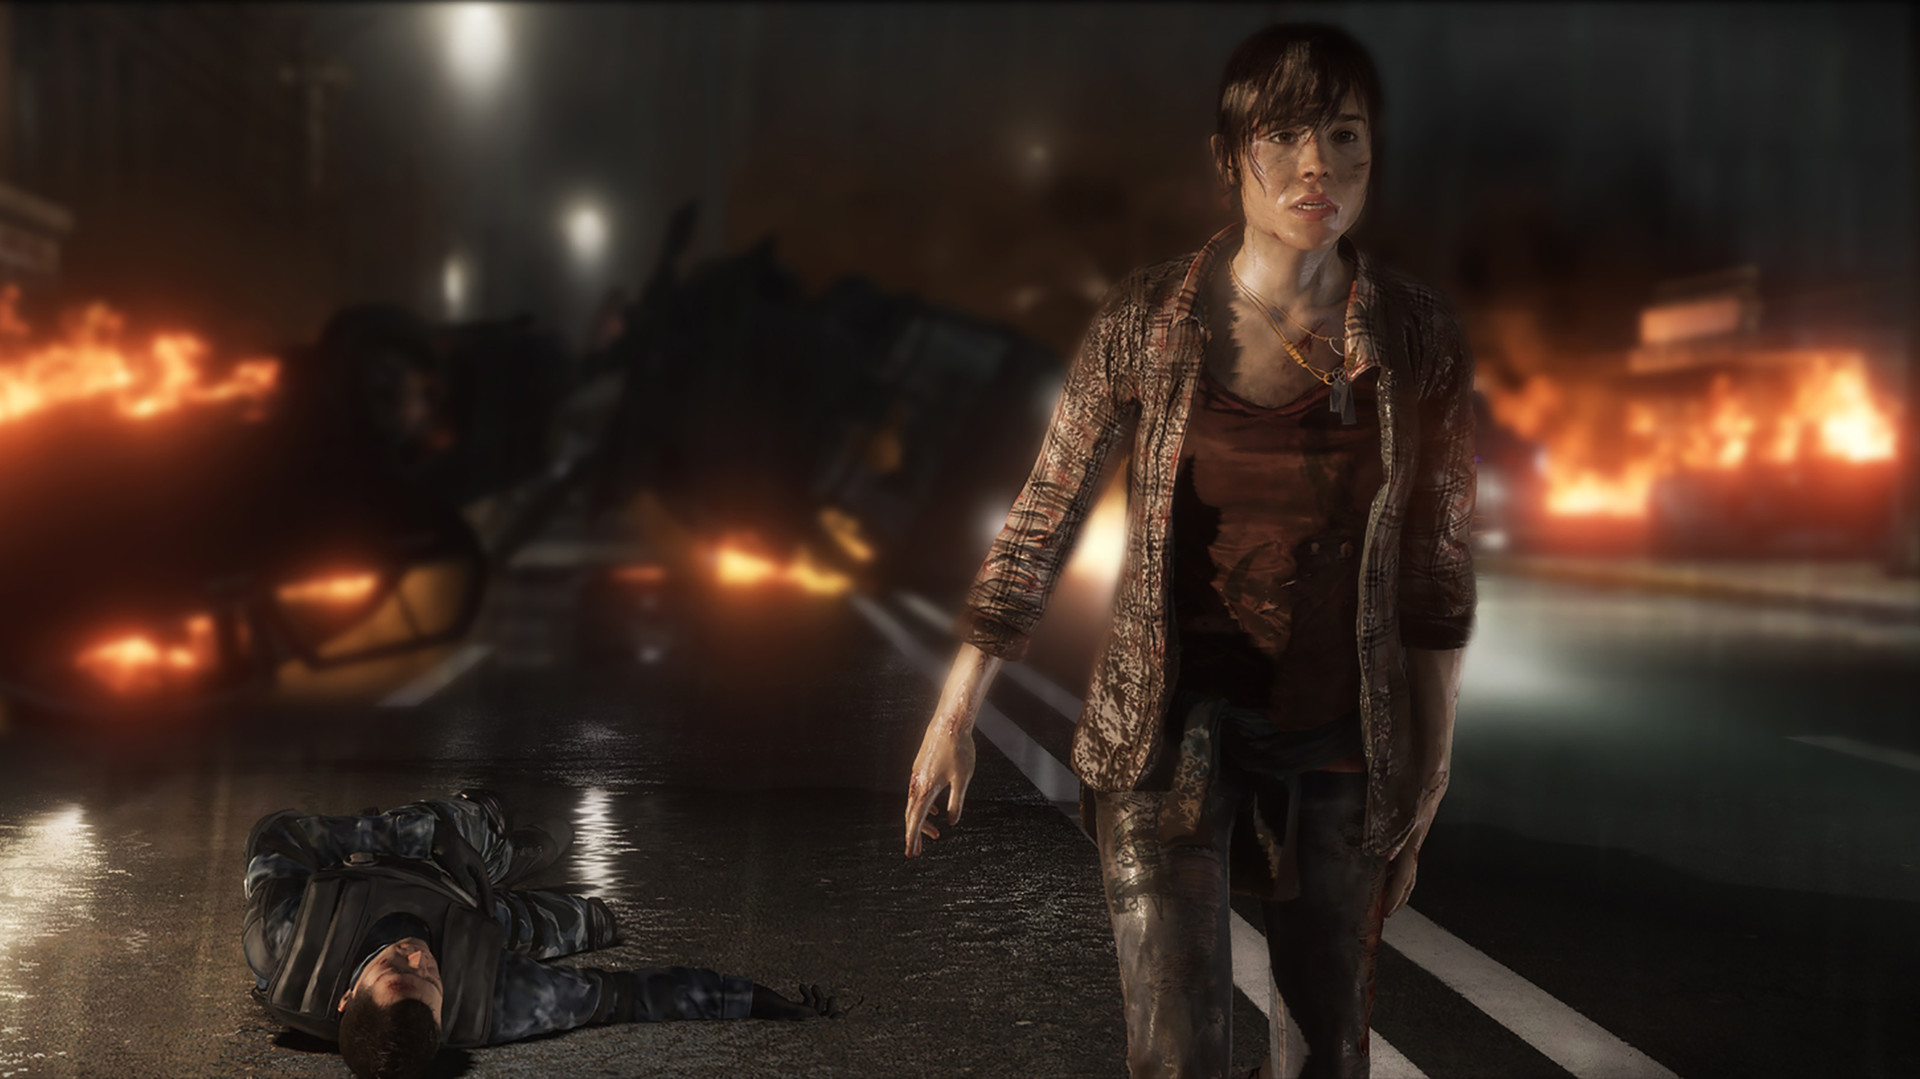 Save 50% on Beyond: Two Souls on Steam